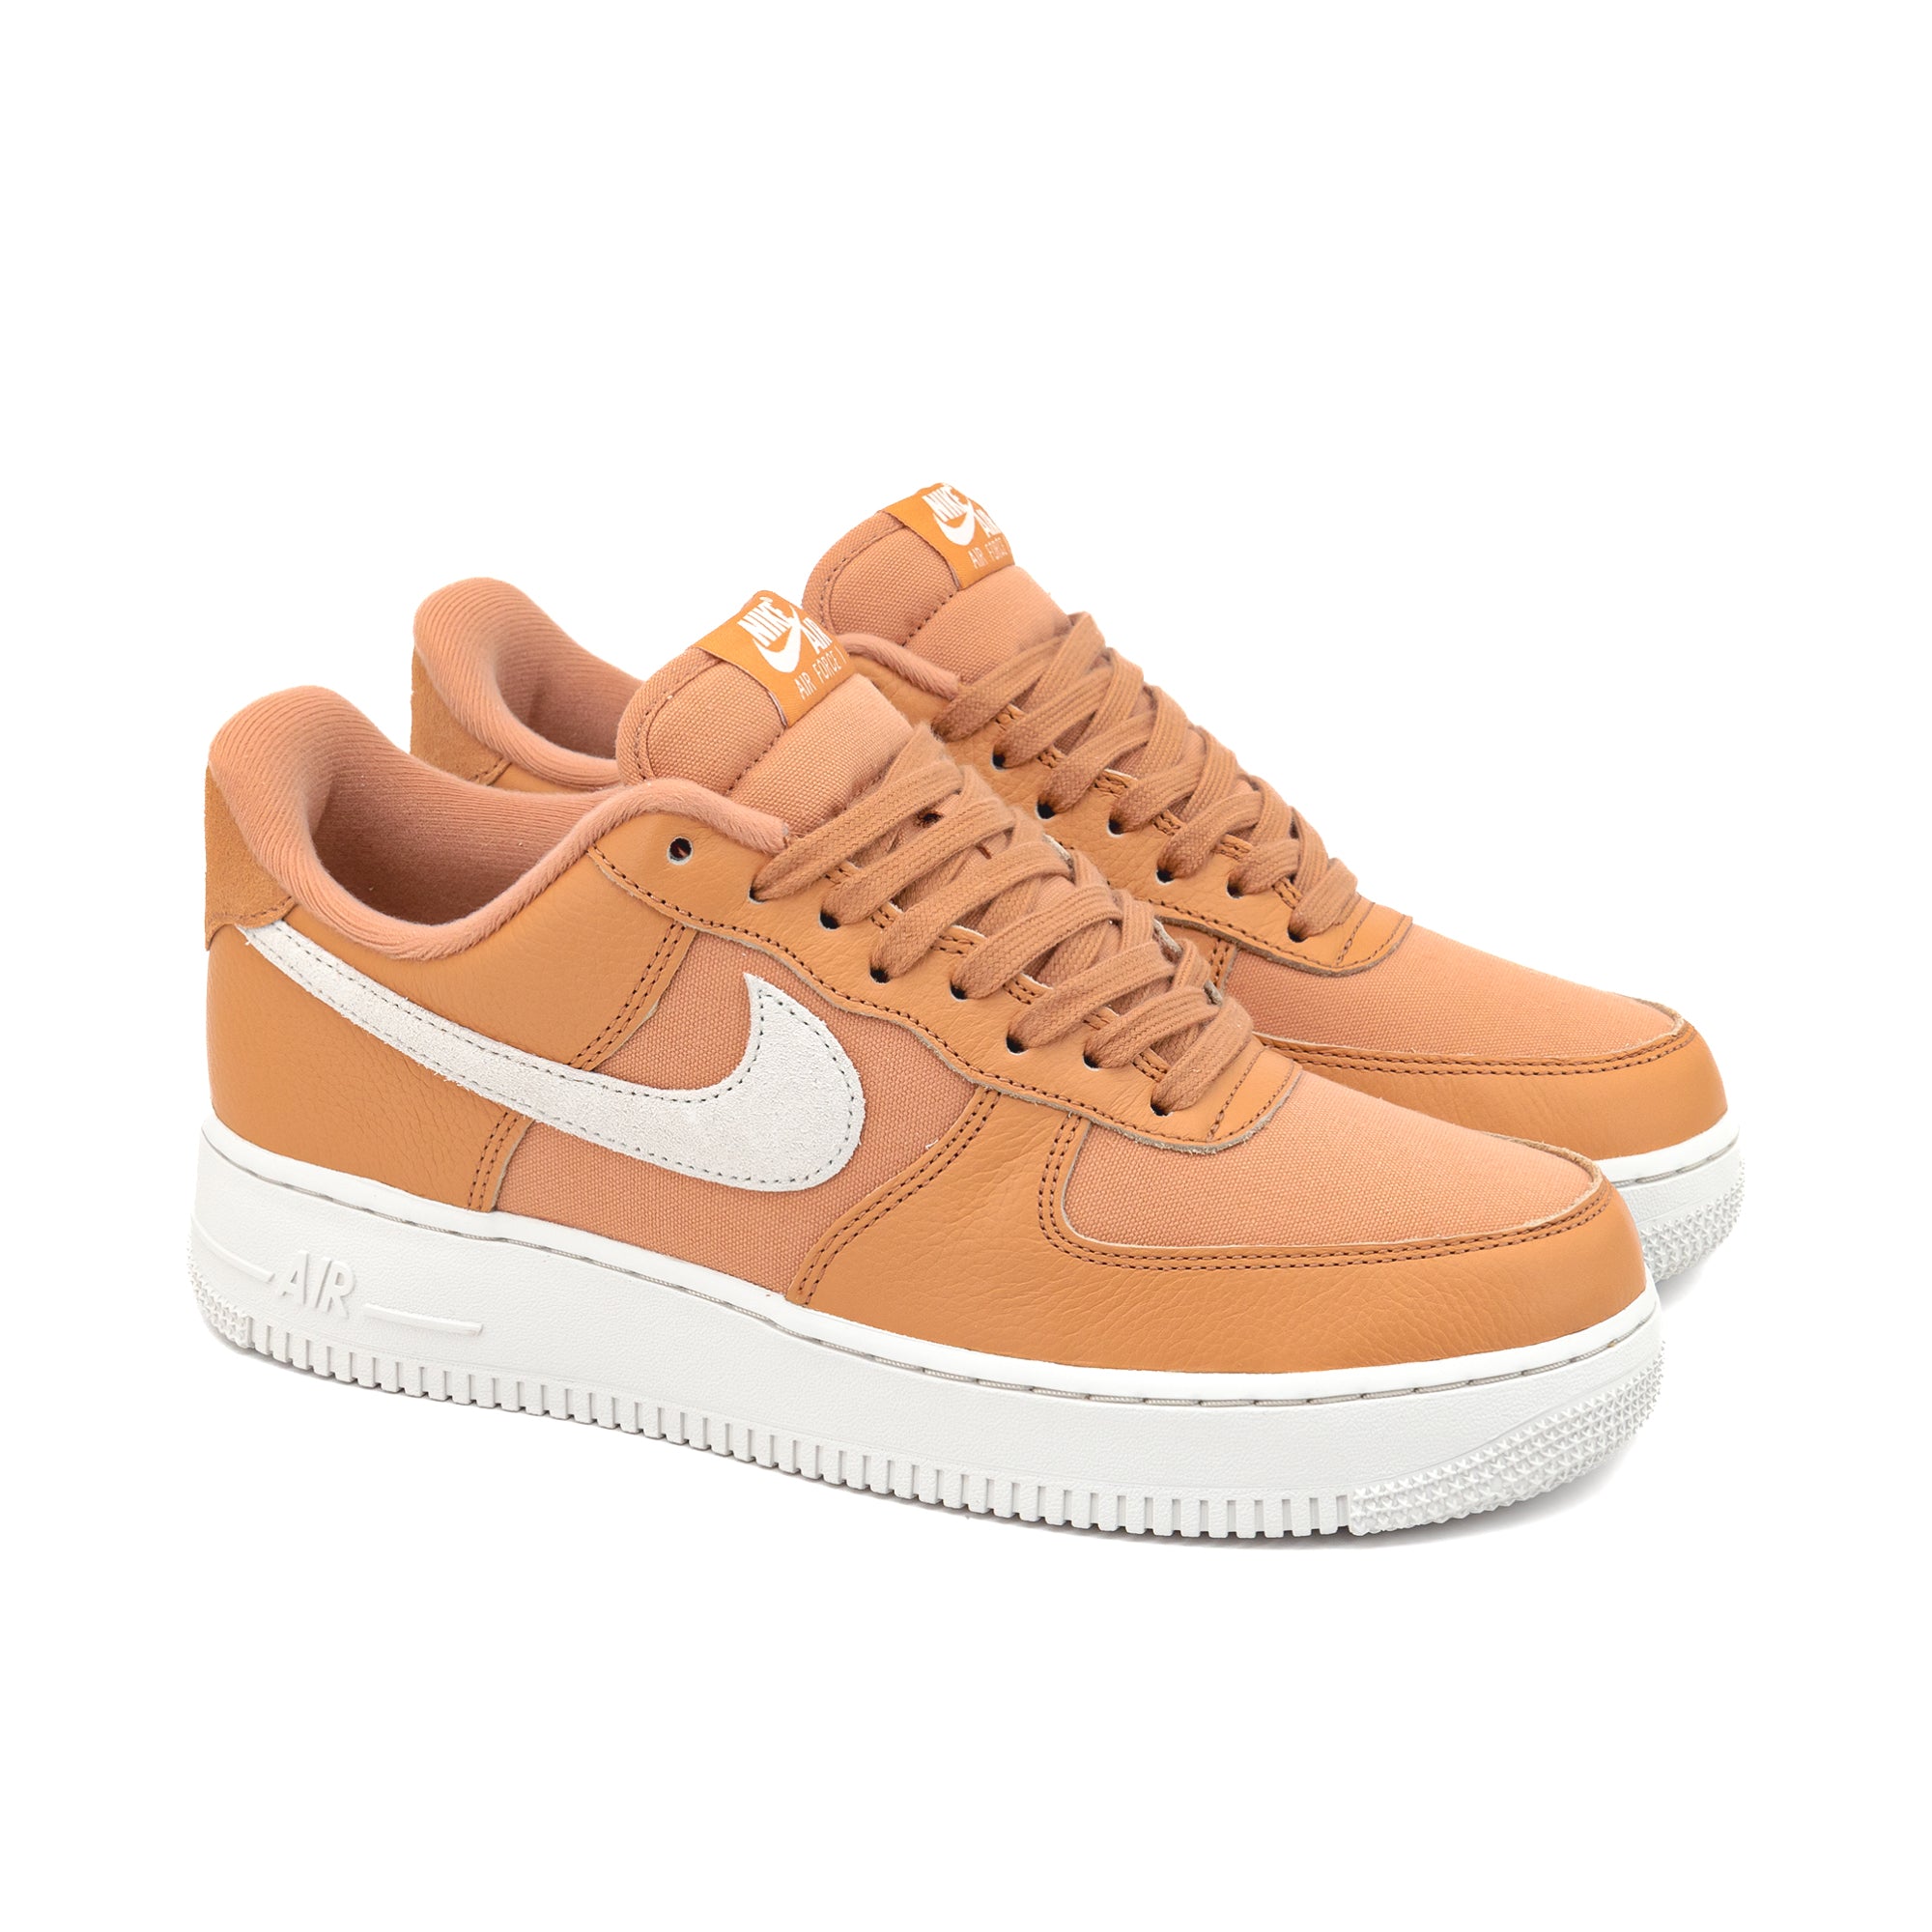 Nike Air Force 1 07 LX AF1 Amber Brown Men Casual Shoes Sneakers DV7186-200